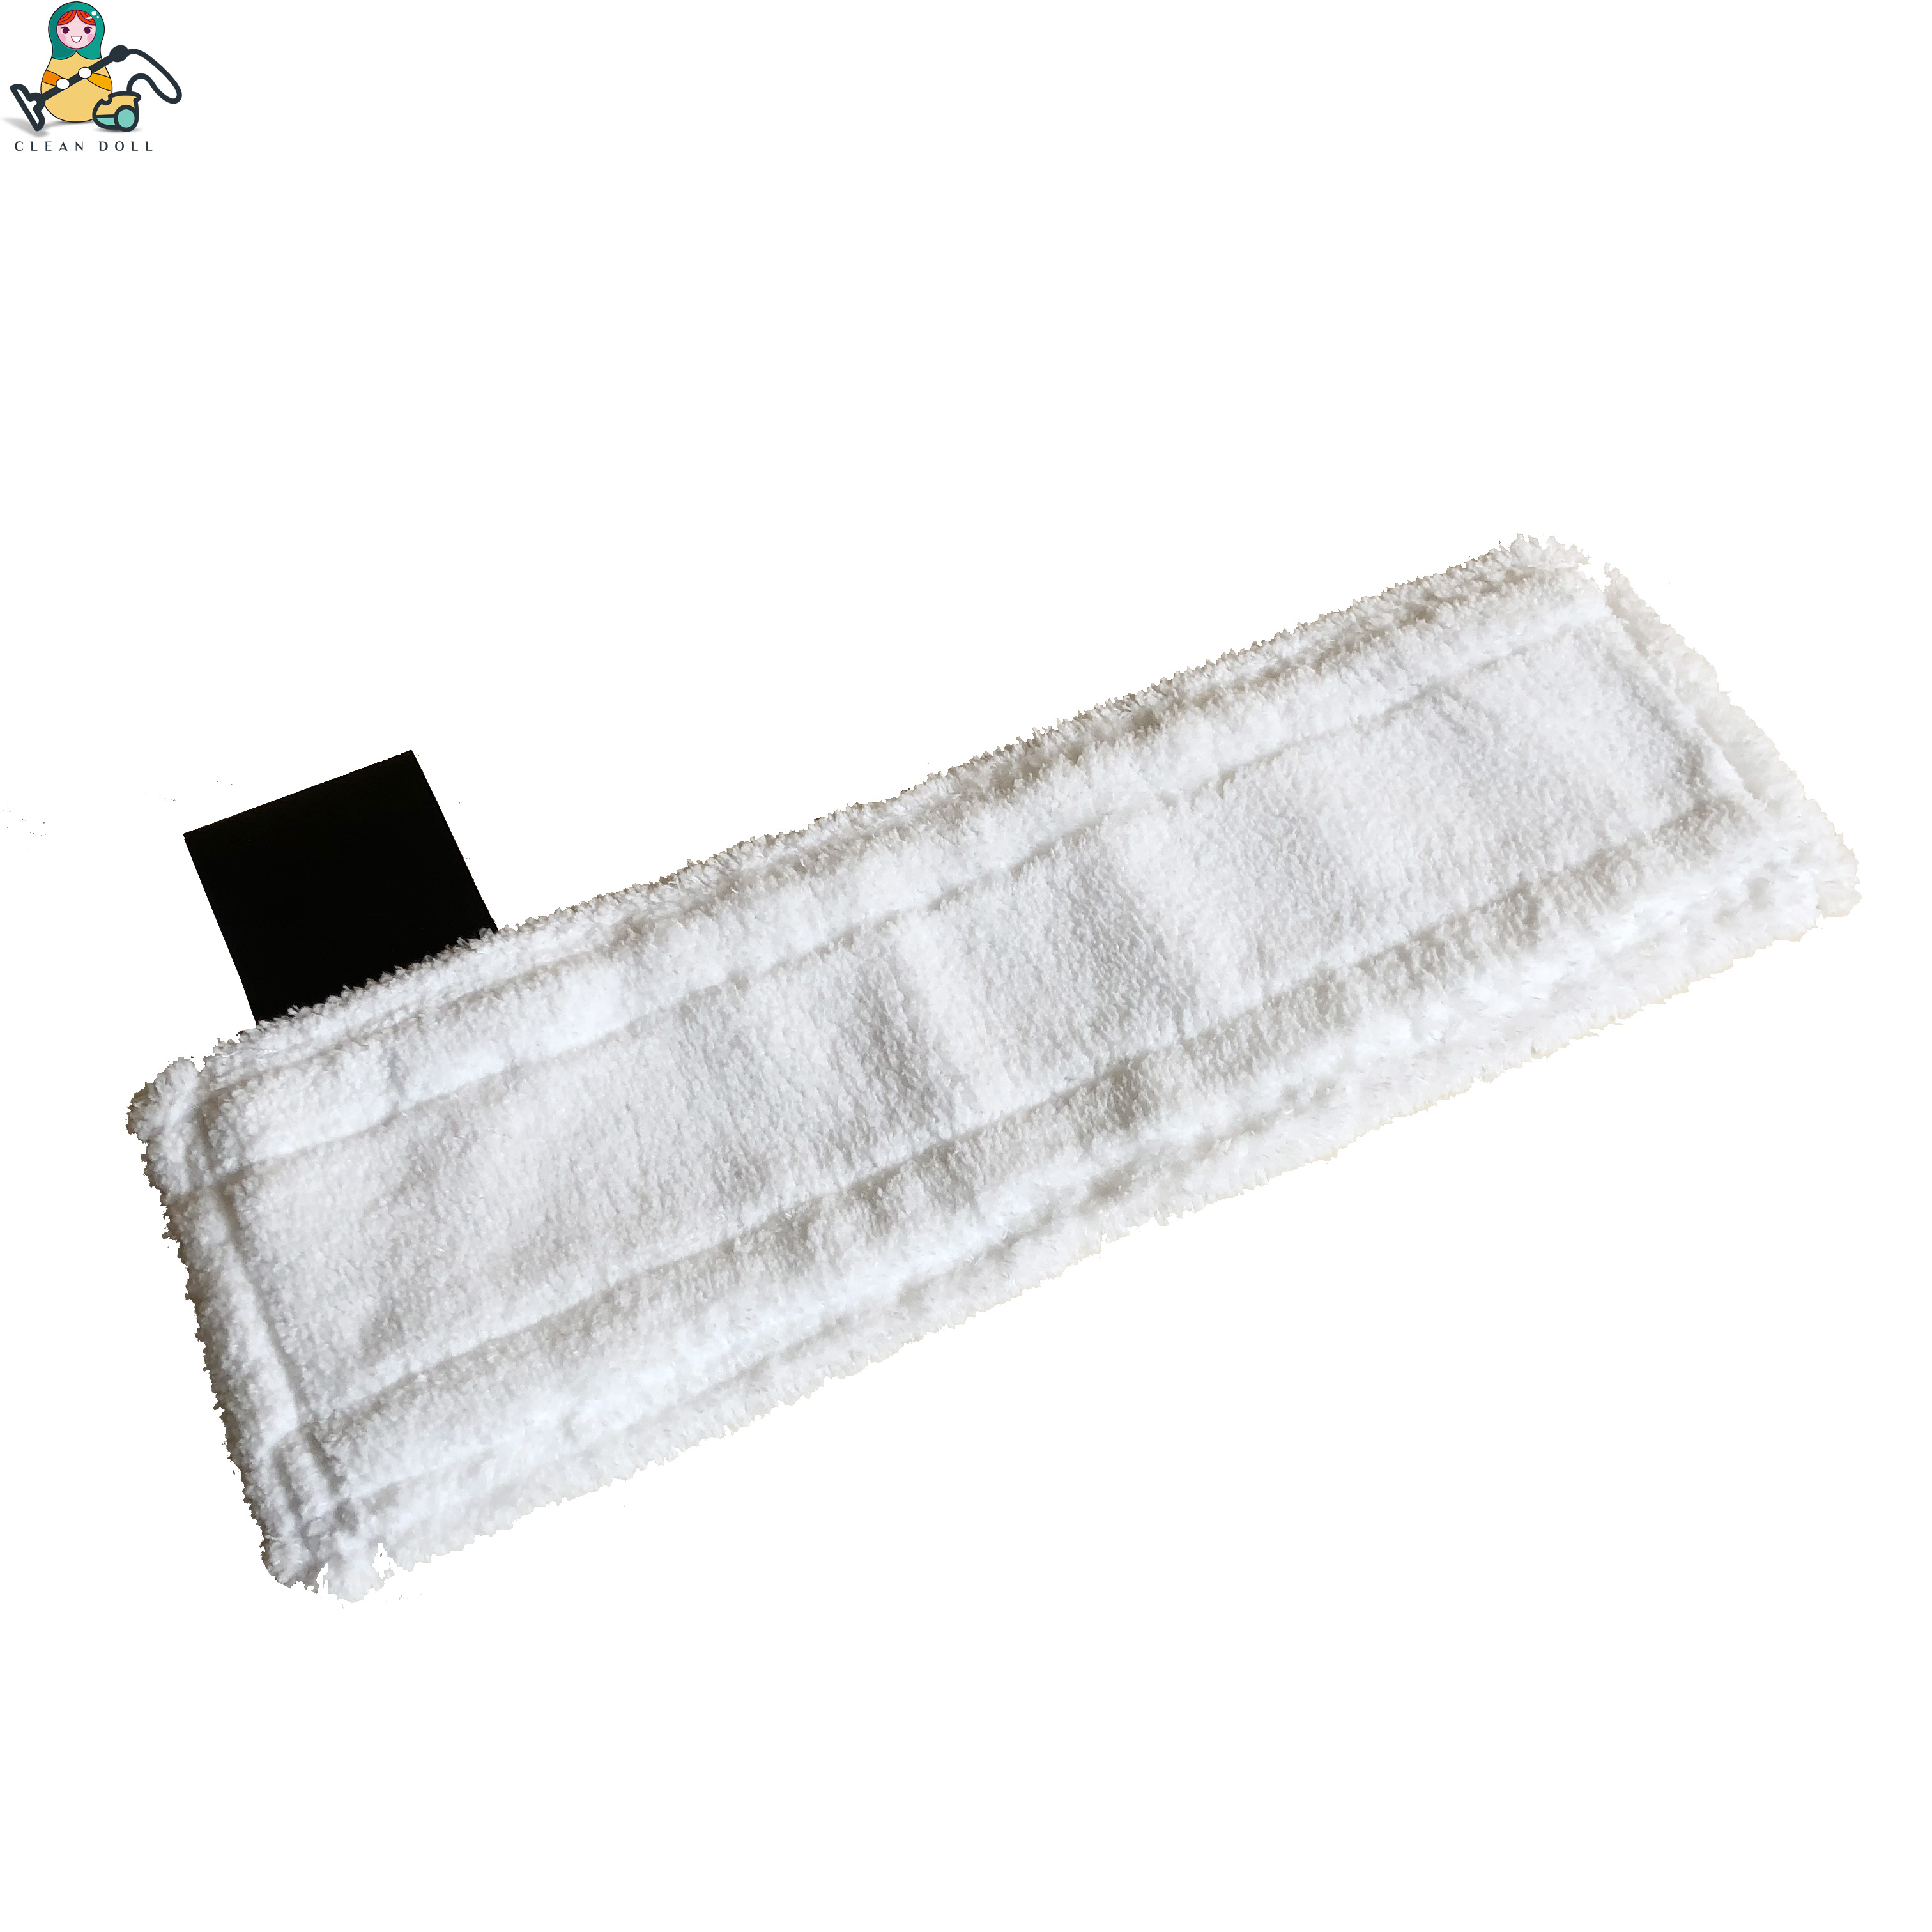 Mop cloth rags nozzle cover for Karcher SC1 SC3 EasyFix SC4 SC5 mop Steam Cleaner brush 2.863-259.0 Steam cleaner spare parts